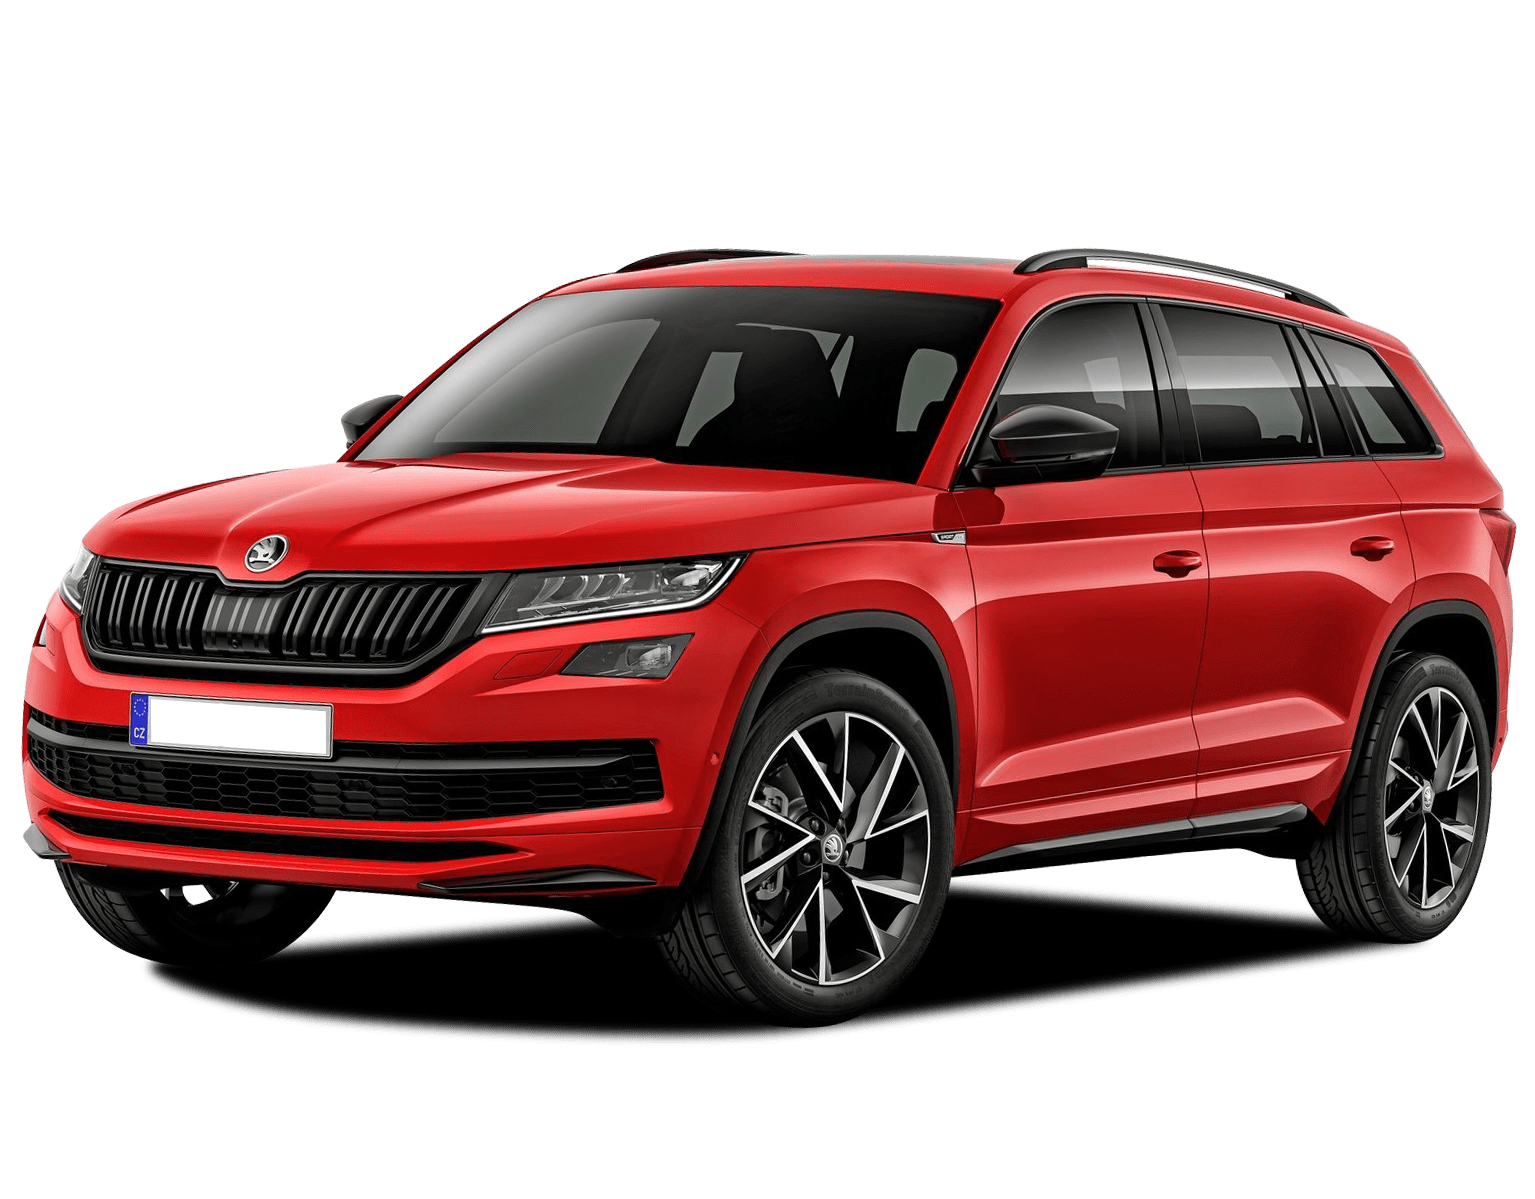 2023 Skoda Kodiaq makes grand debut in India with BS6 Stage 2 compliant